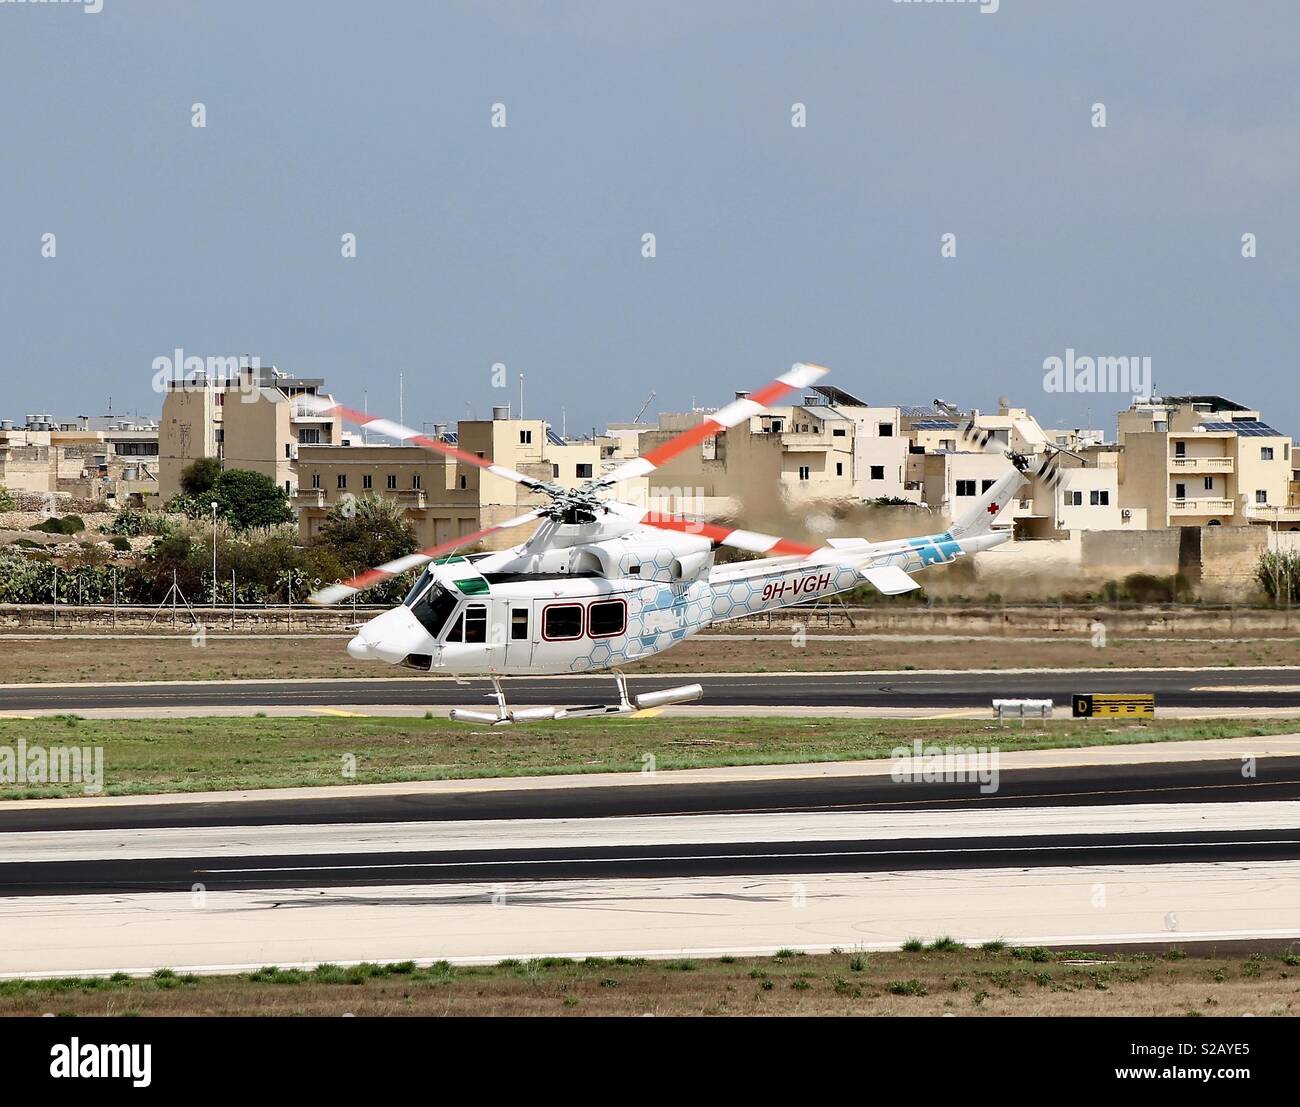 Bell 413 9H-VGH - Hospital Helicopter taking off Stock Photo